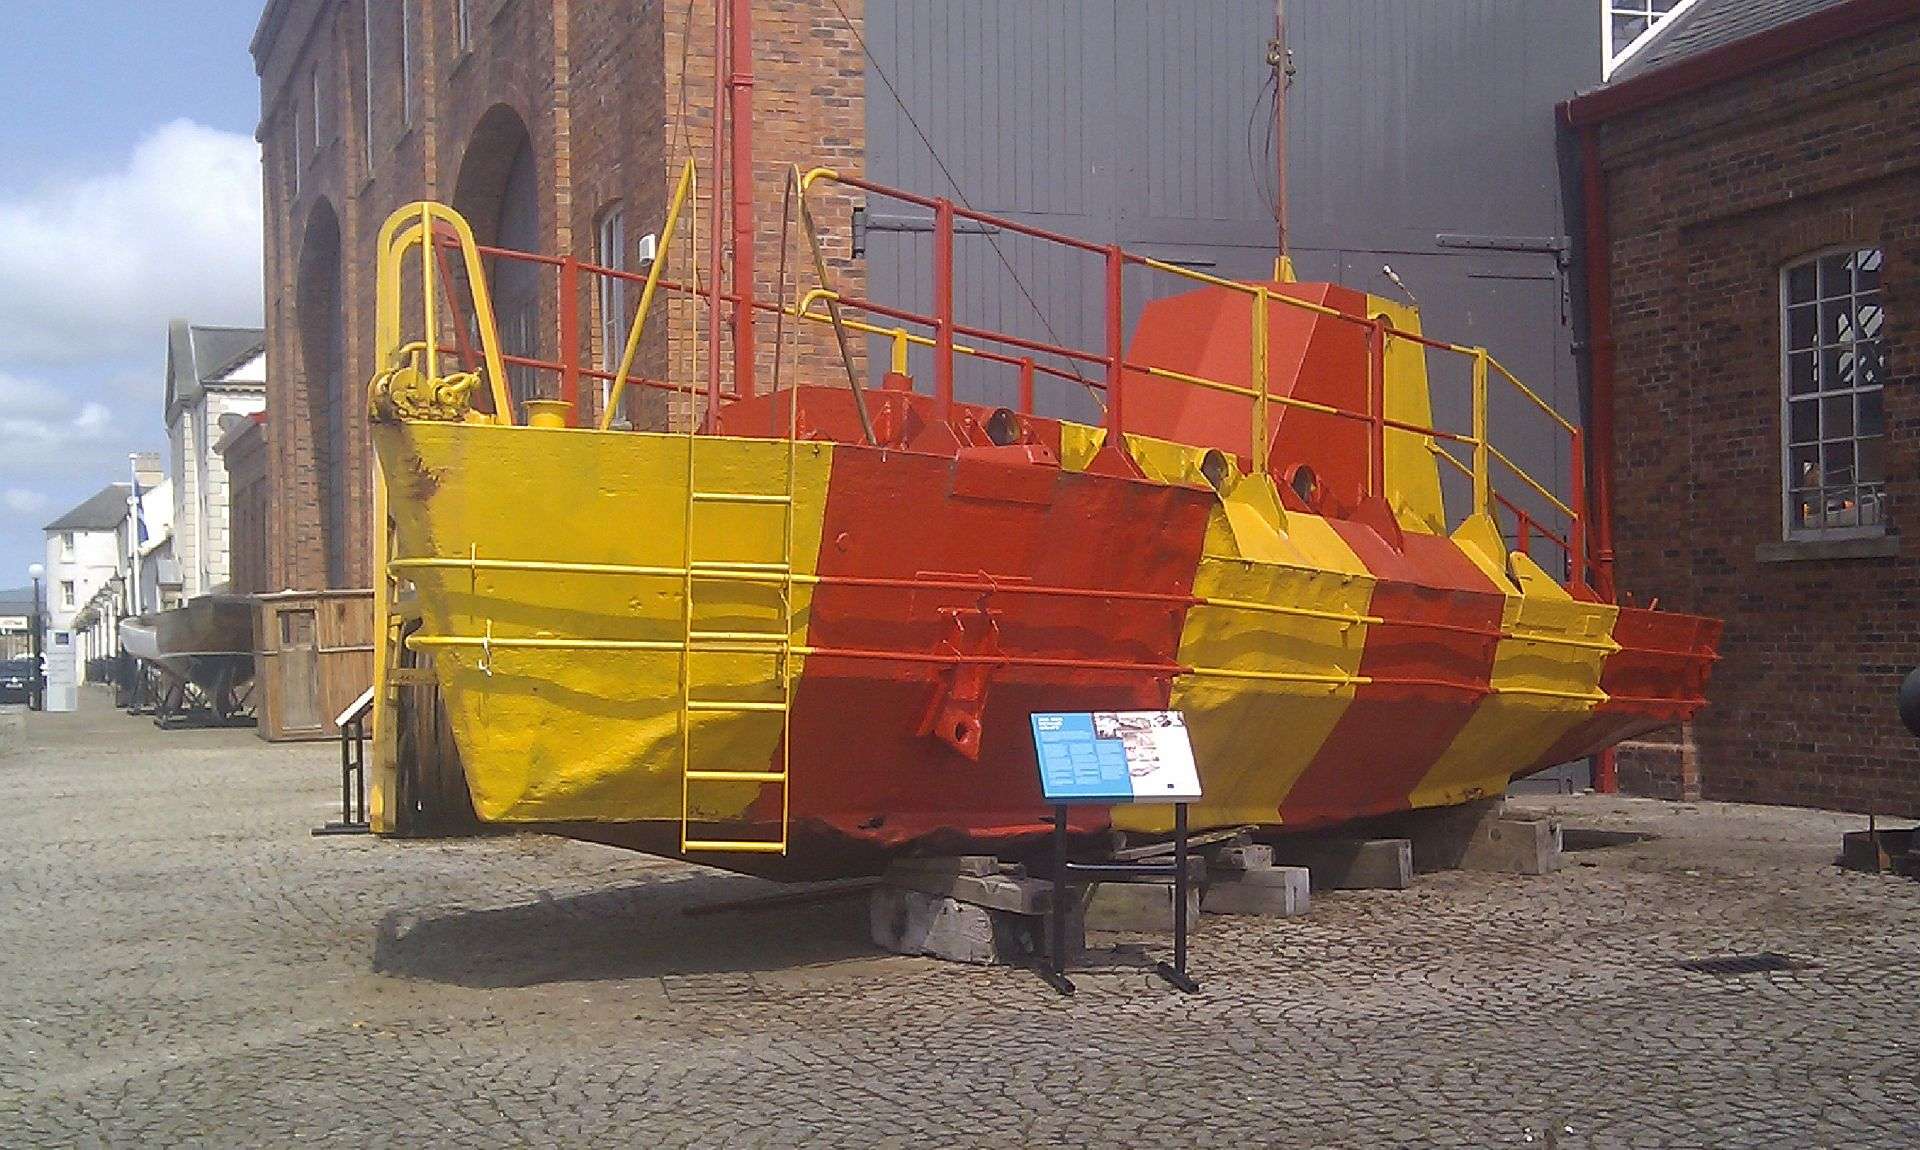 The British made a similar design called the Air-Sea Rescue Float. Image by Rosser1954 CC BY-SA 3.0